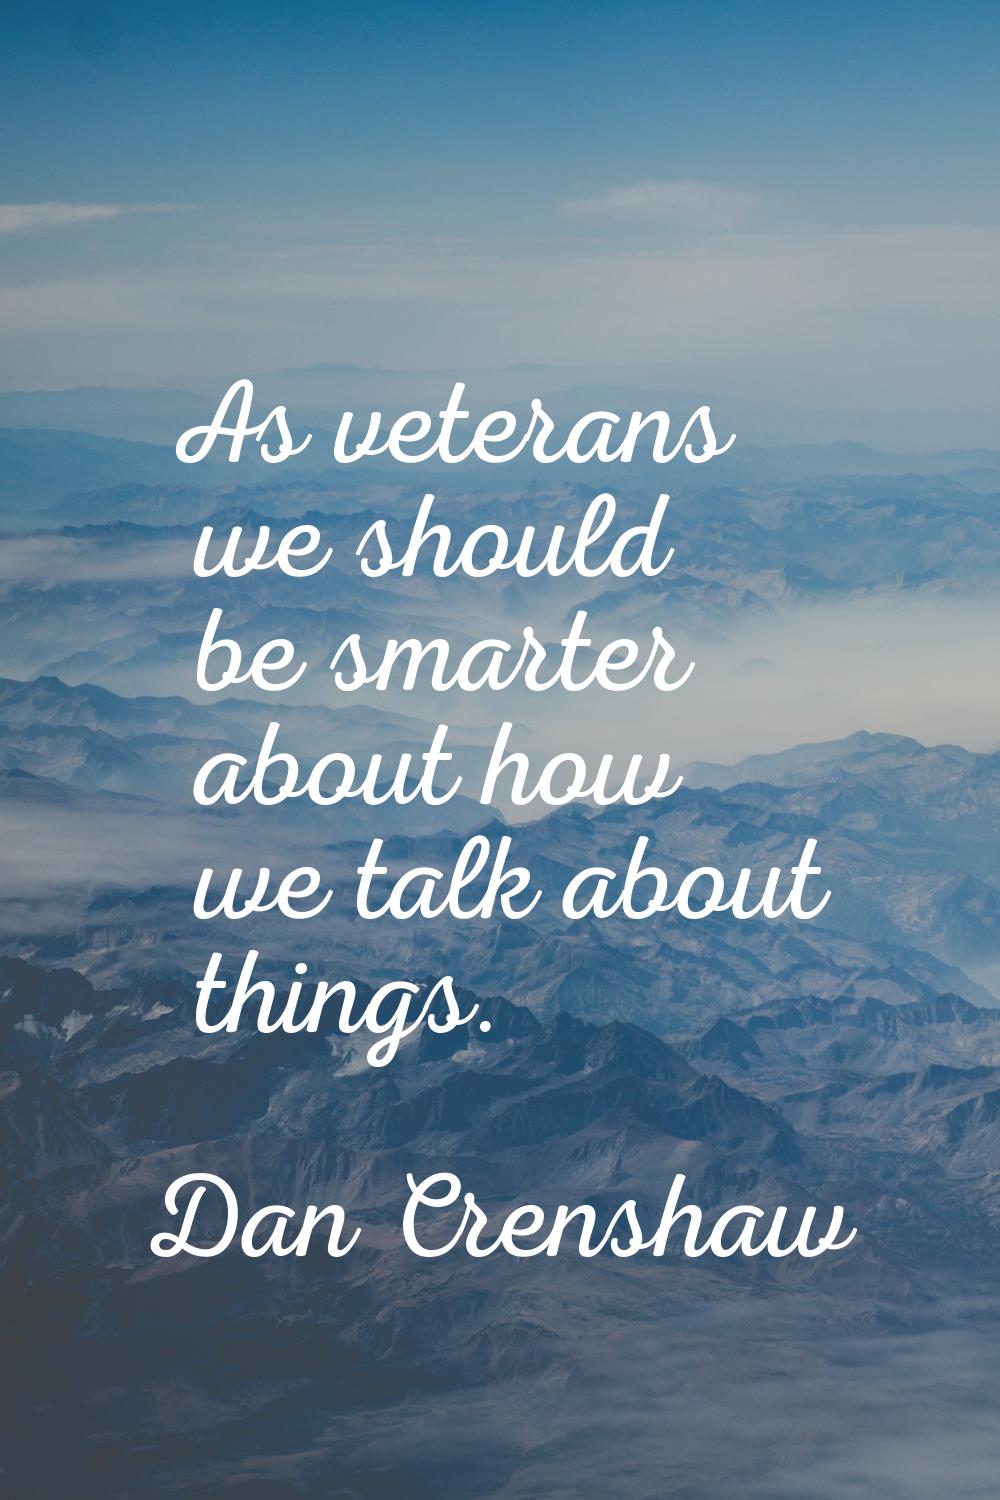 As veterans we should be smarter about how we talk about things.